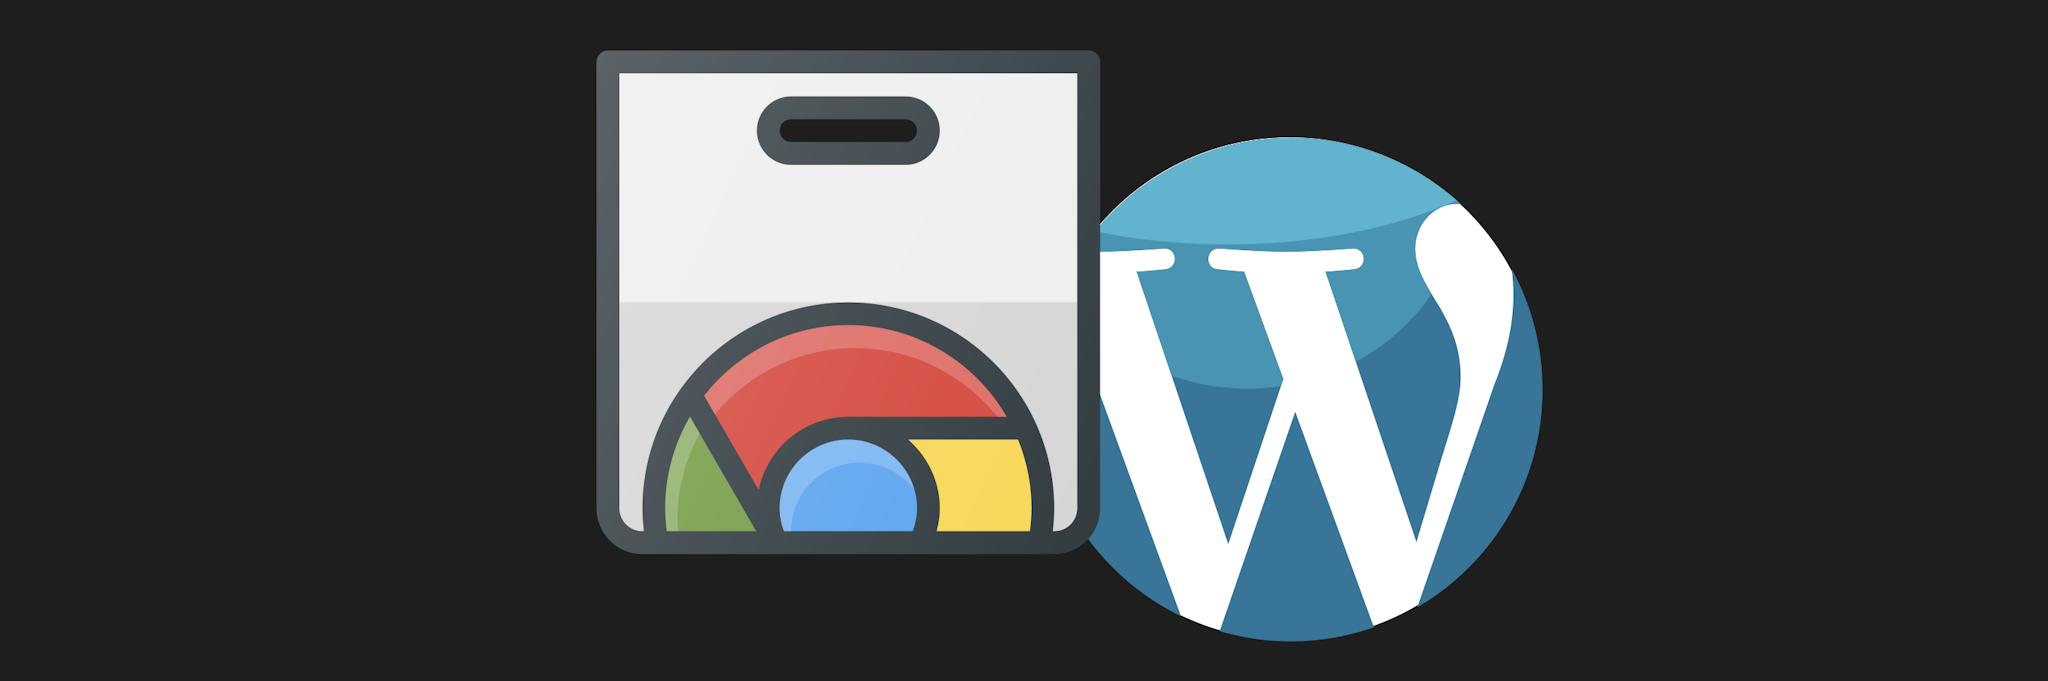 Using the WordPress REST API to Build a Chrome Extension